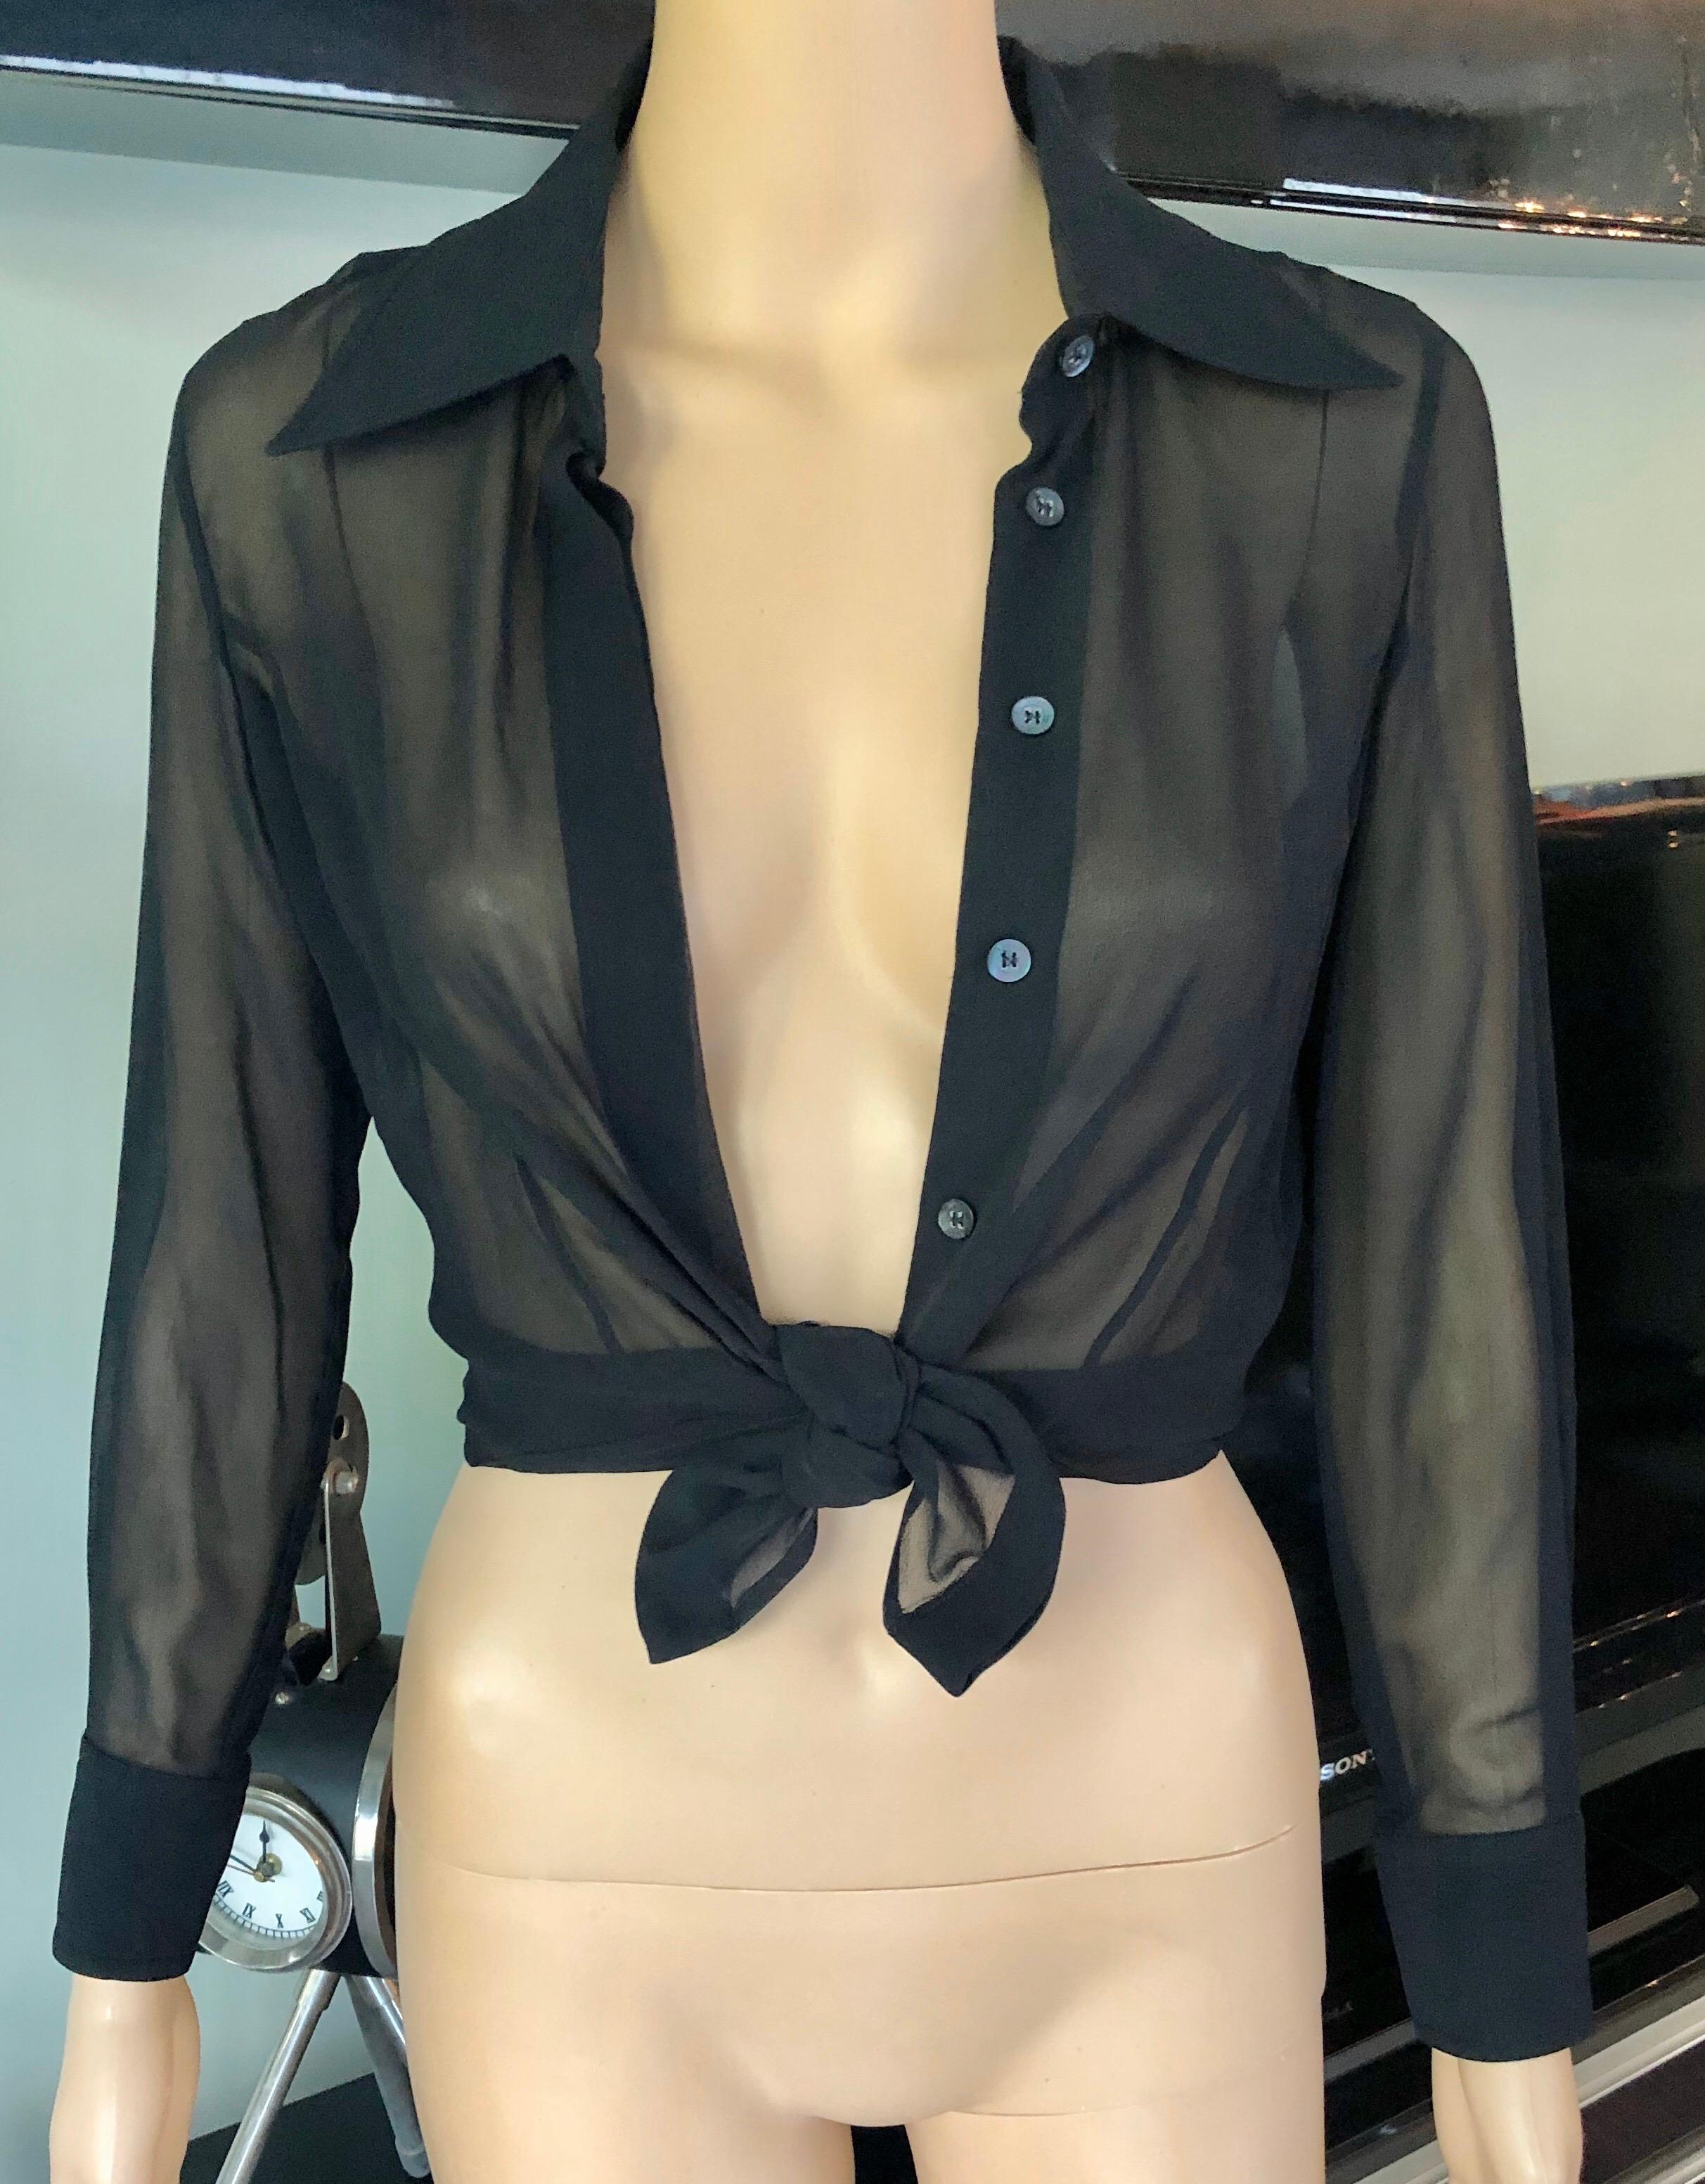 Tom Ford for Gucci Sheer Silk Long Sleeve Black Blouse Top IT 38

Gucci sheer silk long sleeve shirt top with pointed collar and button closures at front.
